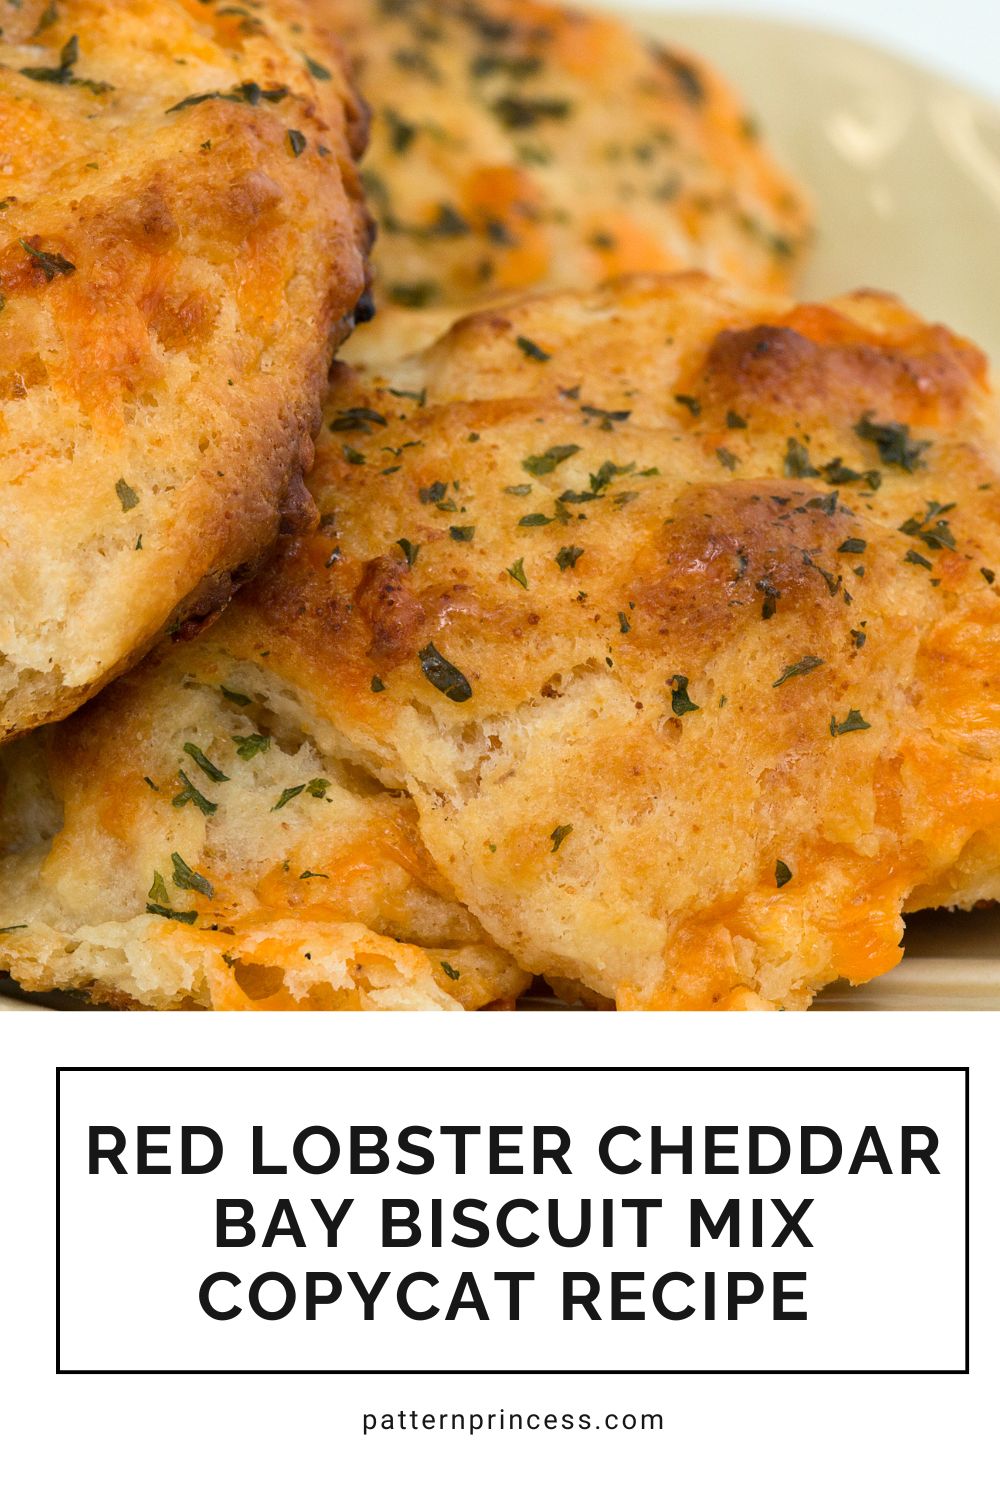 Red Lobster Cheddar Bay Biscuit Mix Copycat Recipe